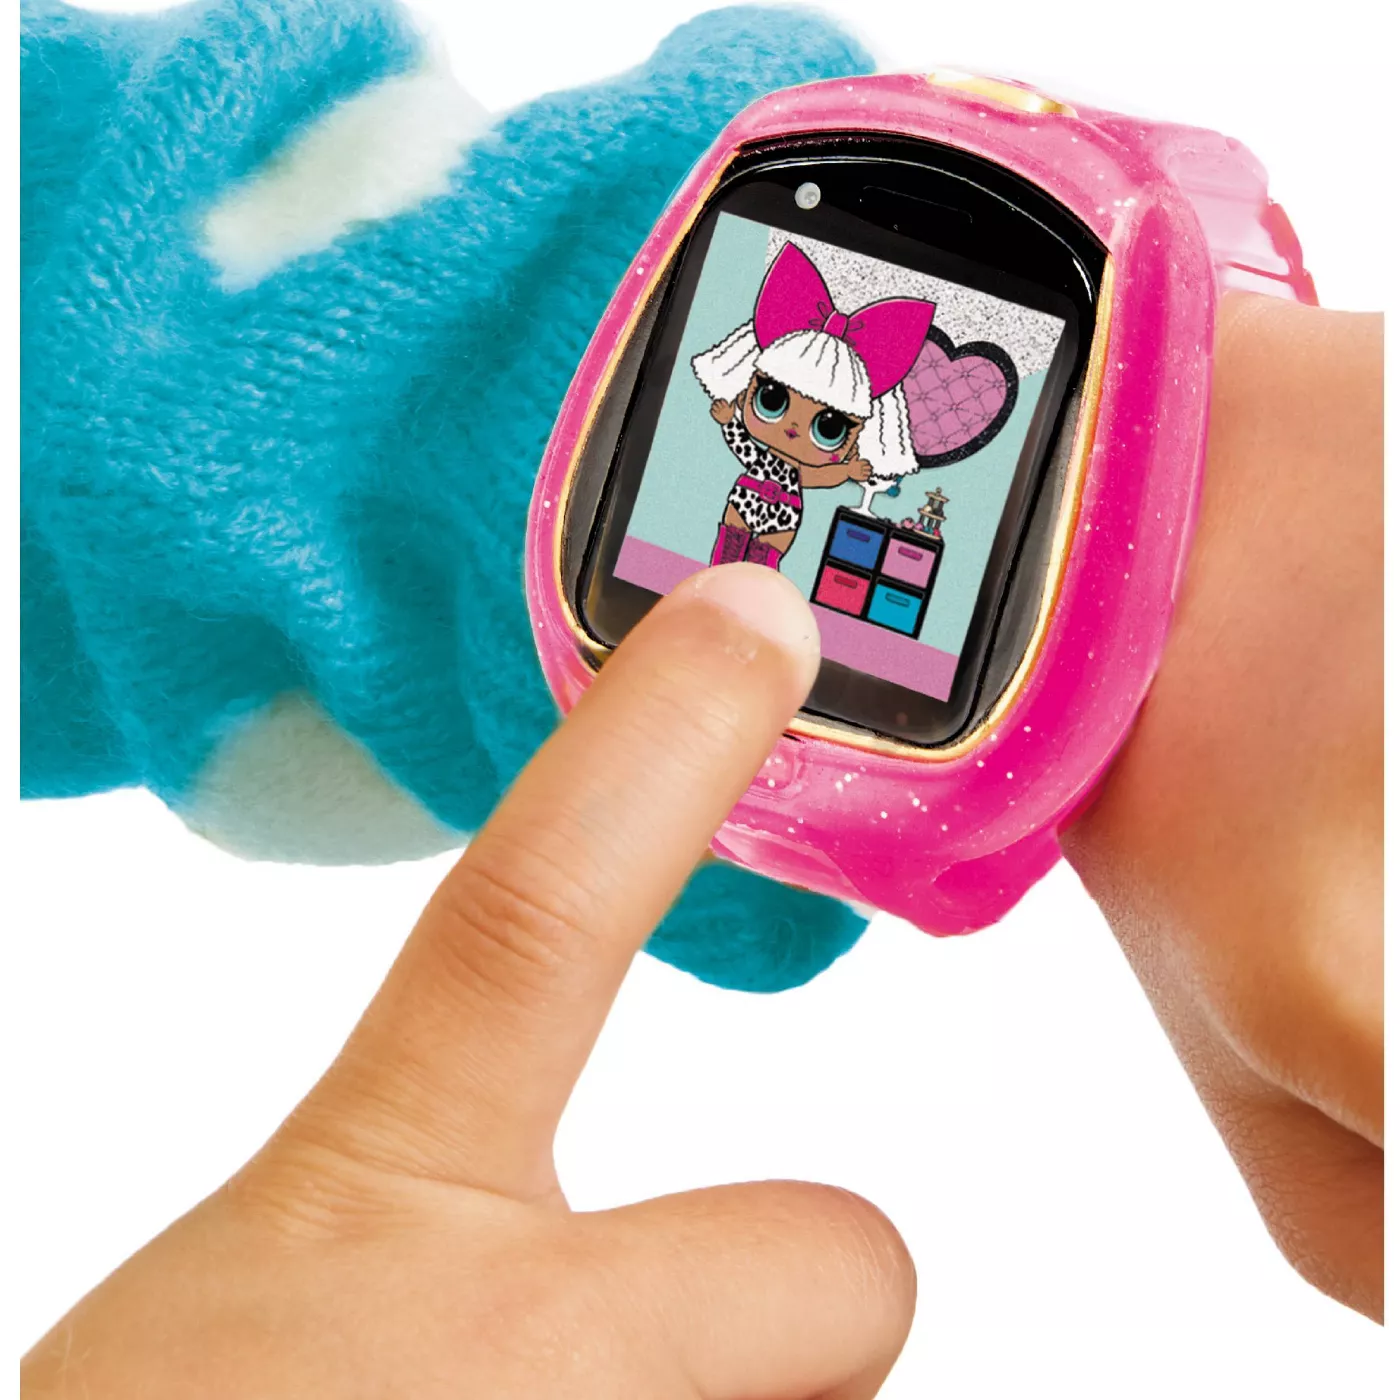 L.O.L. Surprise! Smartwatch! Pink -  Camera, Video, Games, Activities and More - £15.95 GBP